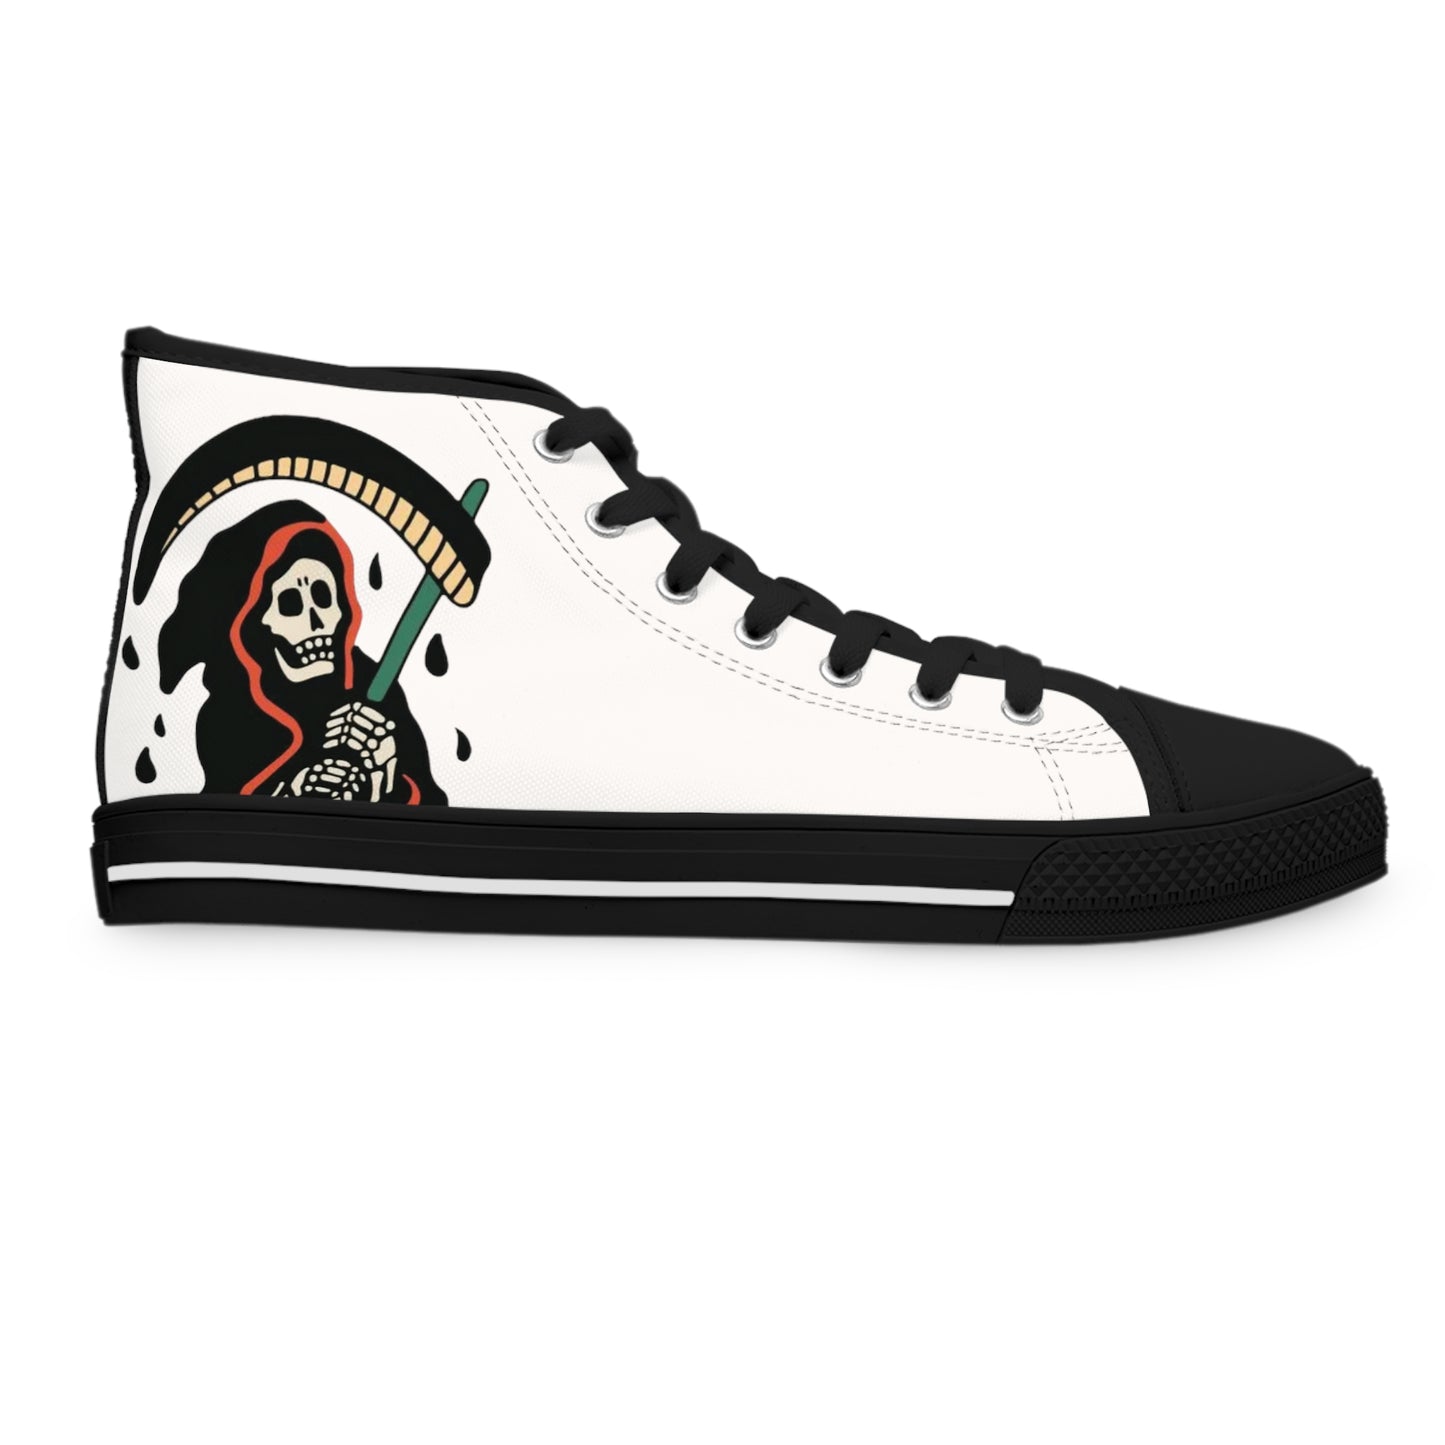 Death before dishonor Women's High Top Sneakers